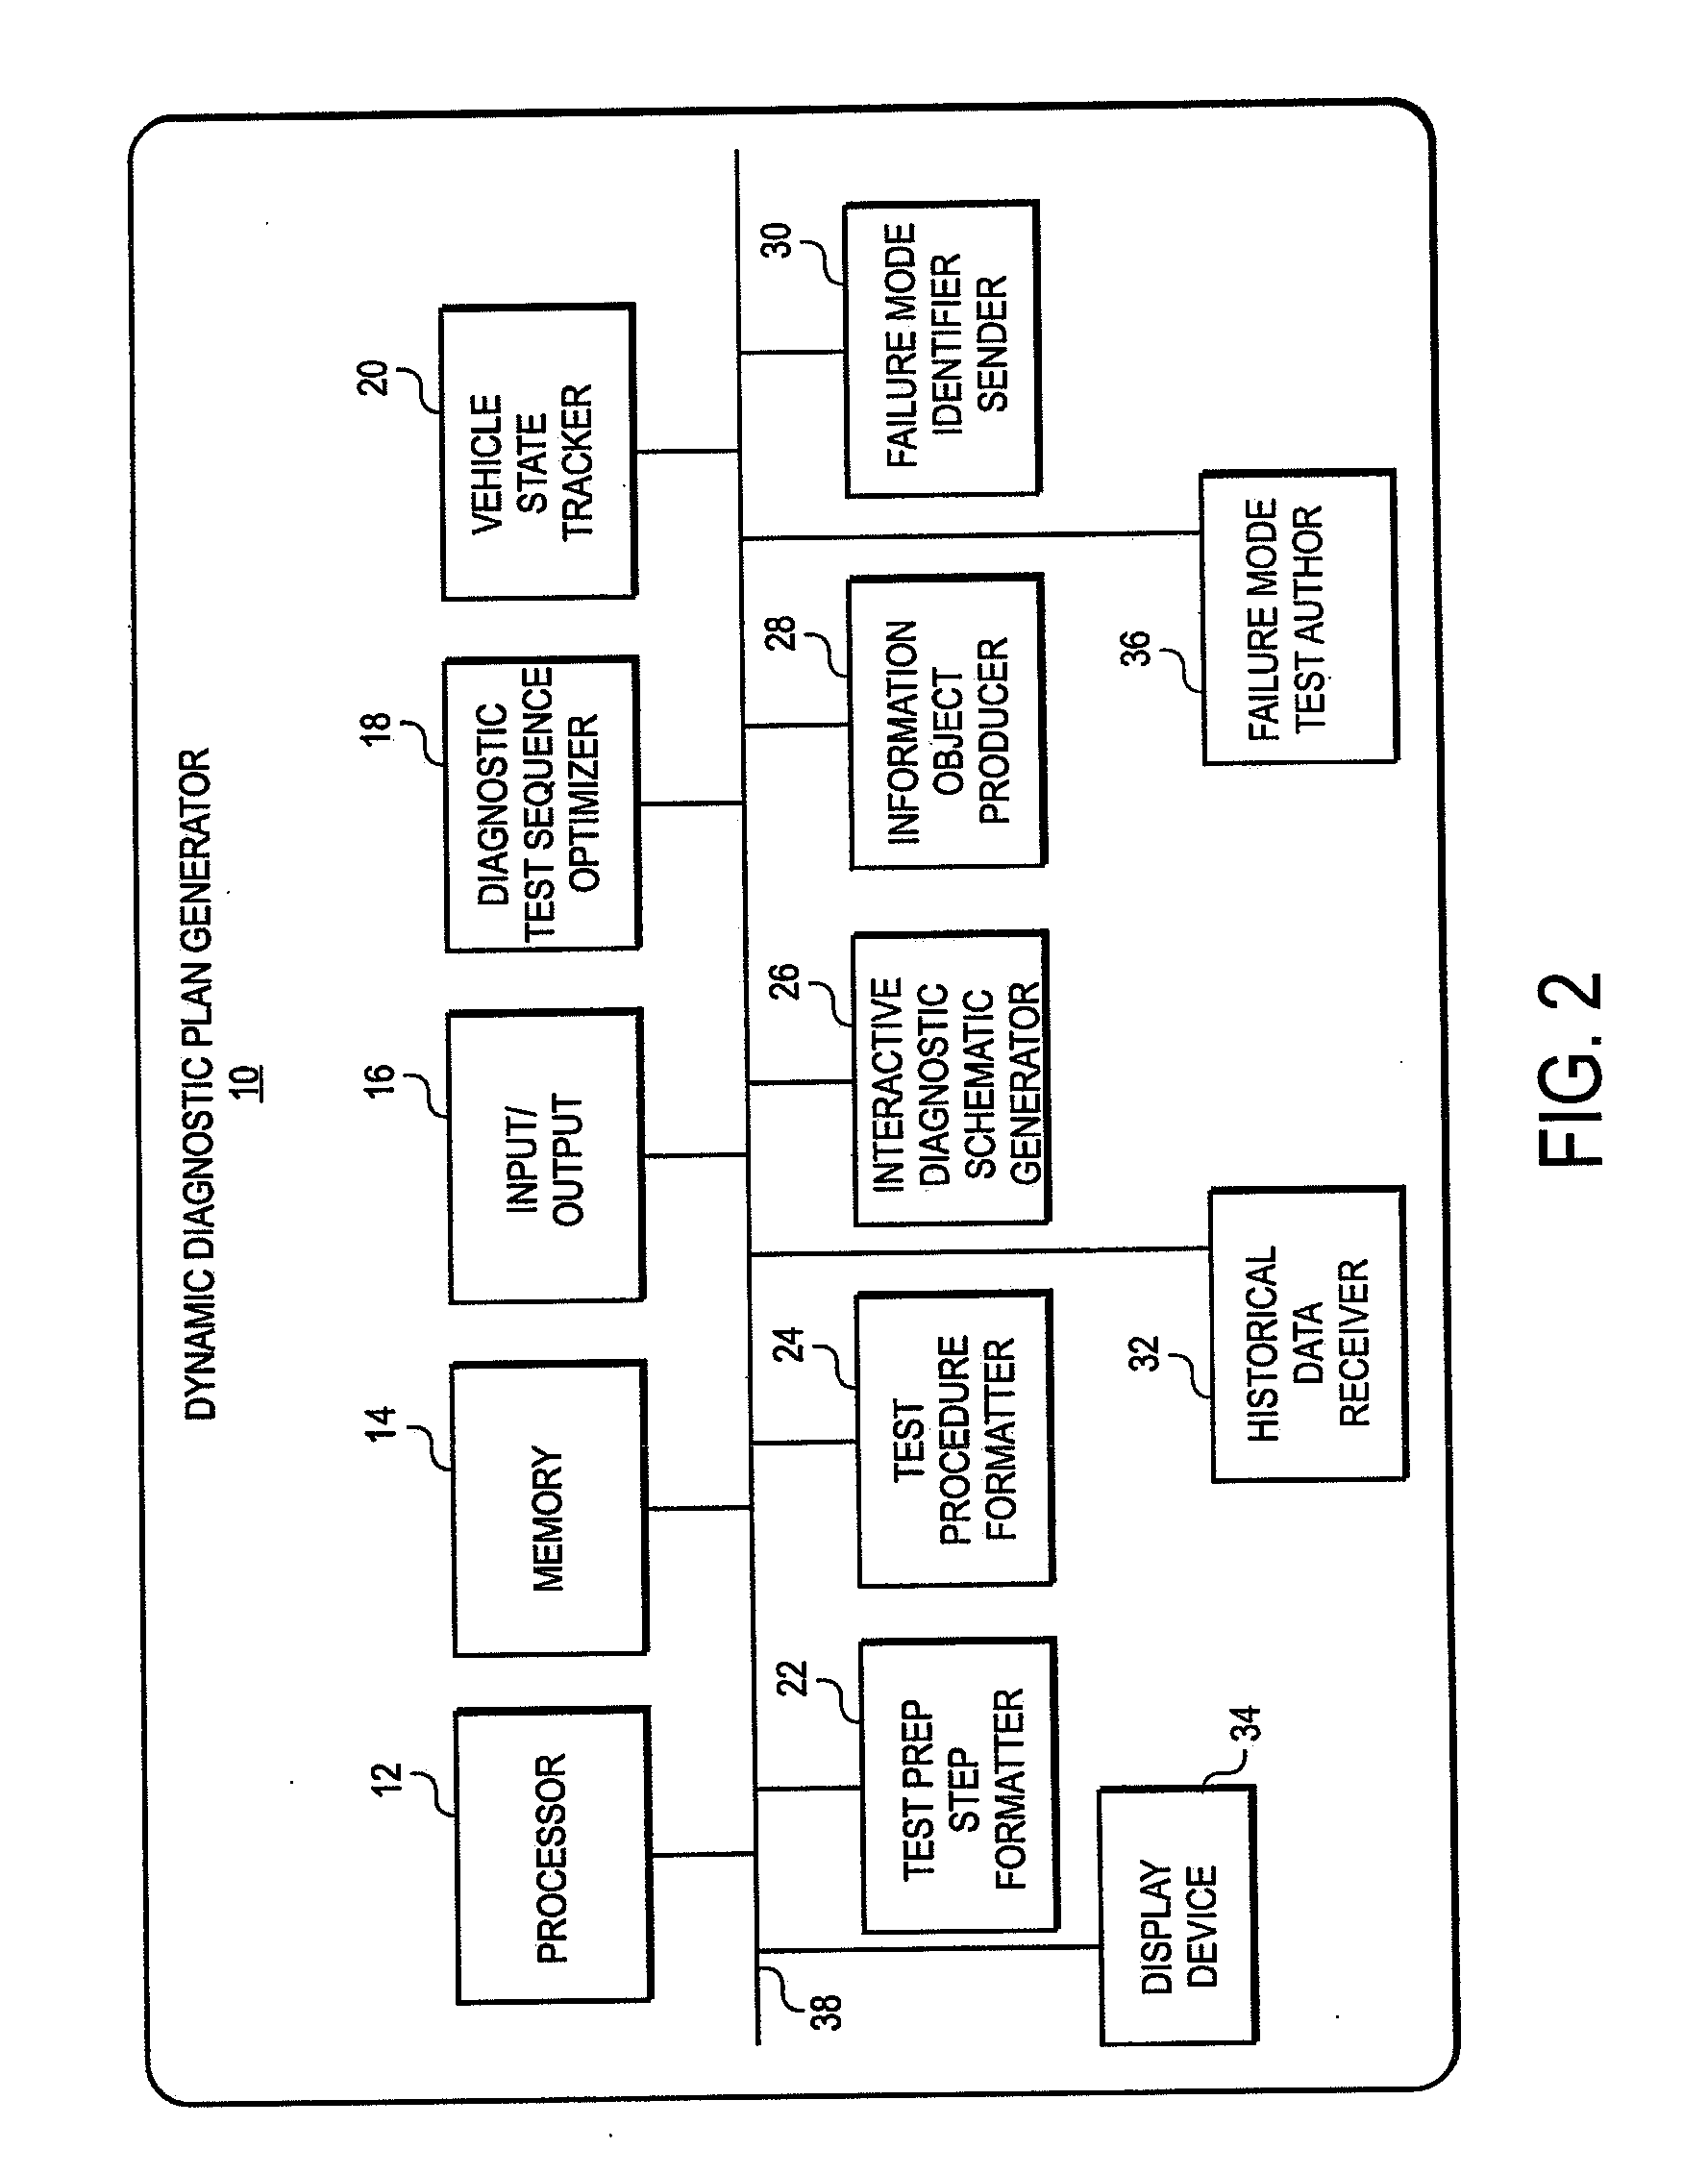 Dynamic decision sequencing method and apparatus for optimiing a diagnostic test plan